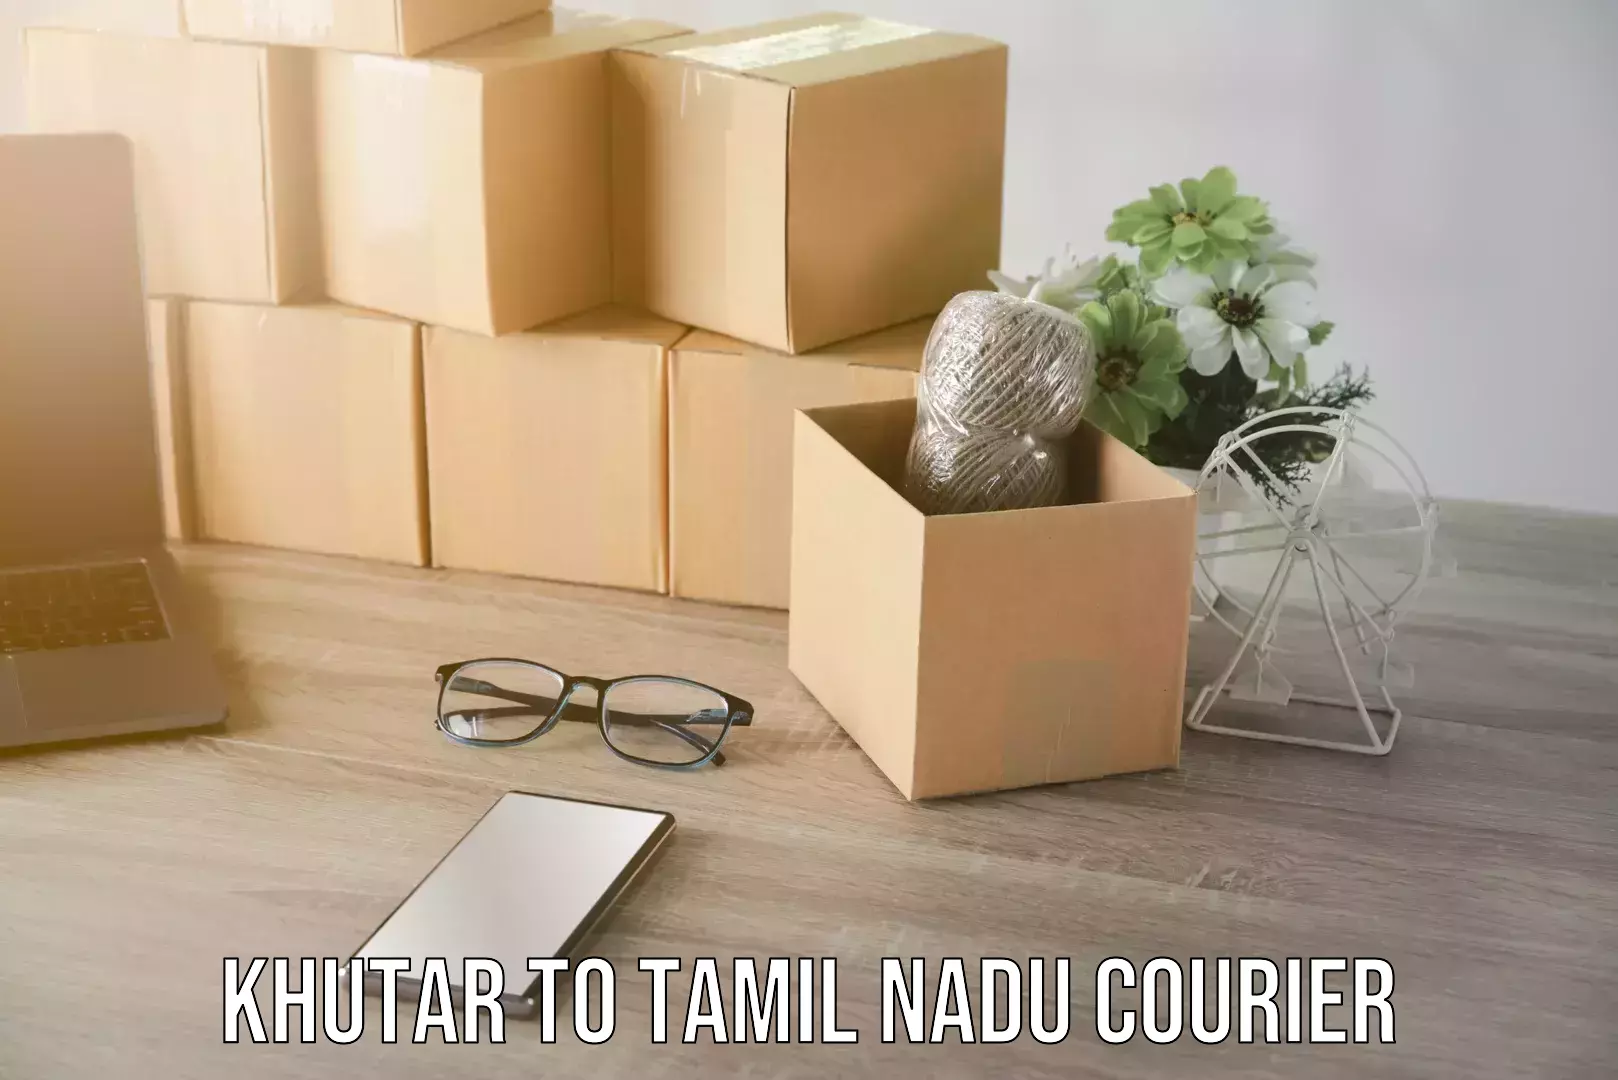 Professional relocation services Khutar to Tamil Nadu